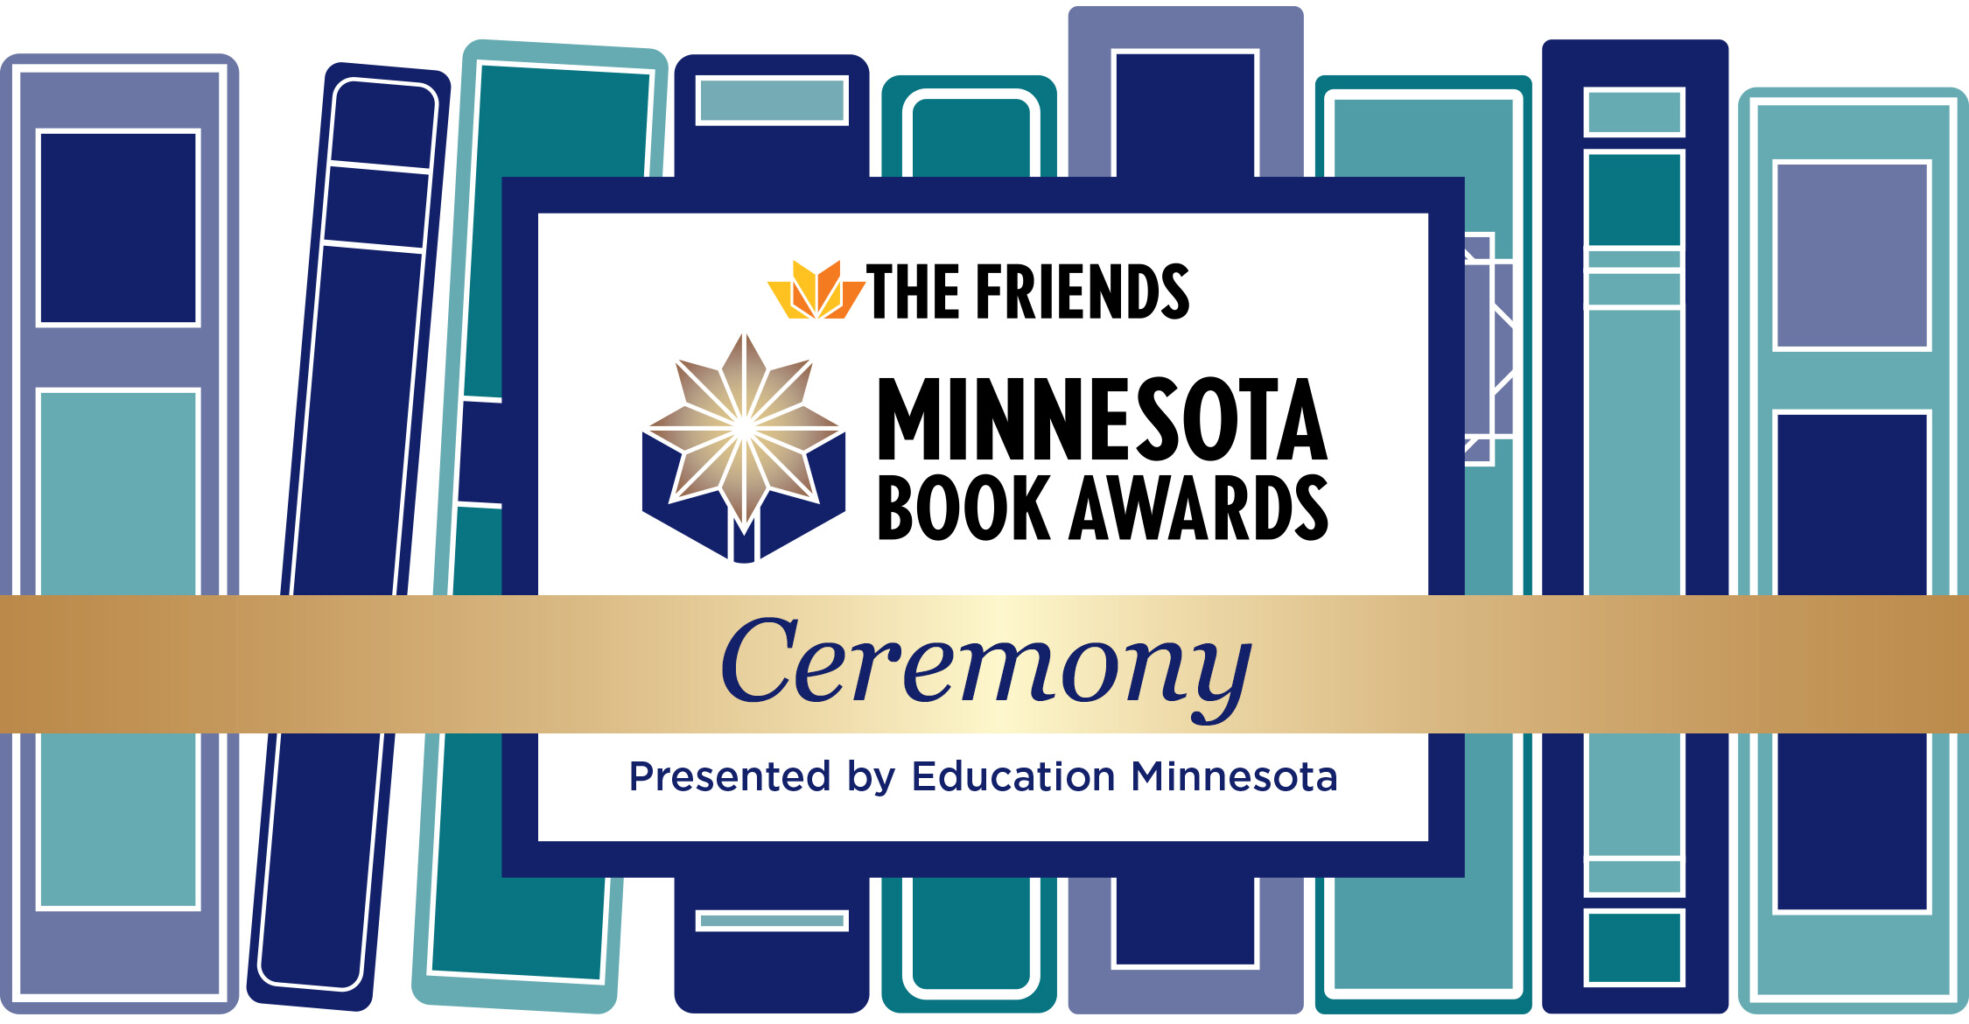 36th Annual Minnesota Book Awards Ceremony @ Ordway Center for the Performing Arts